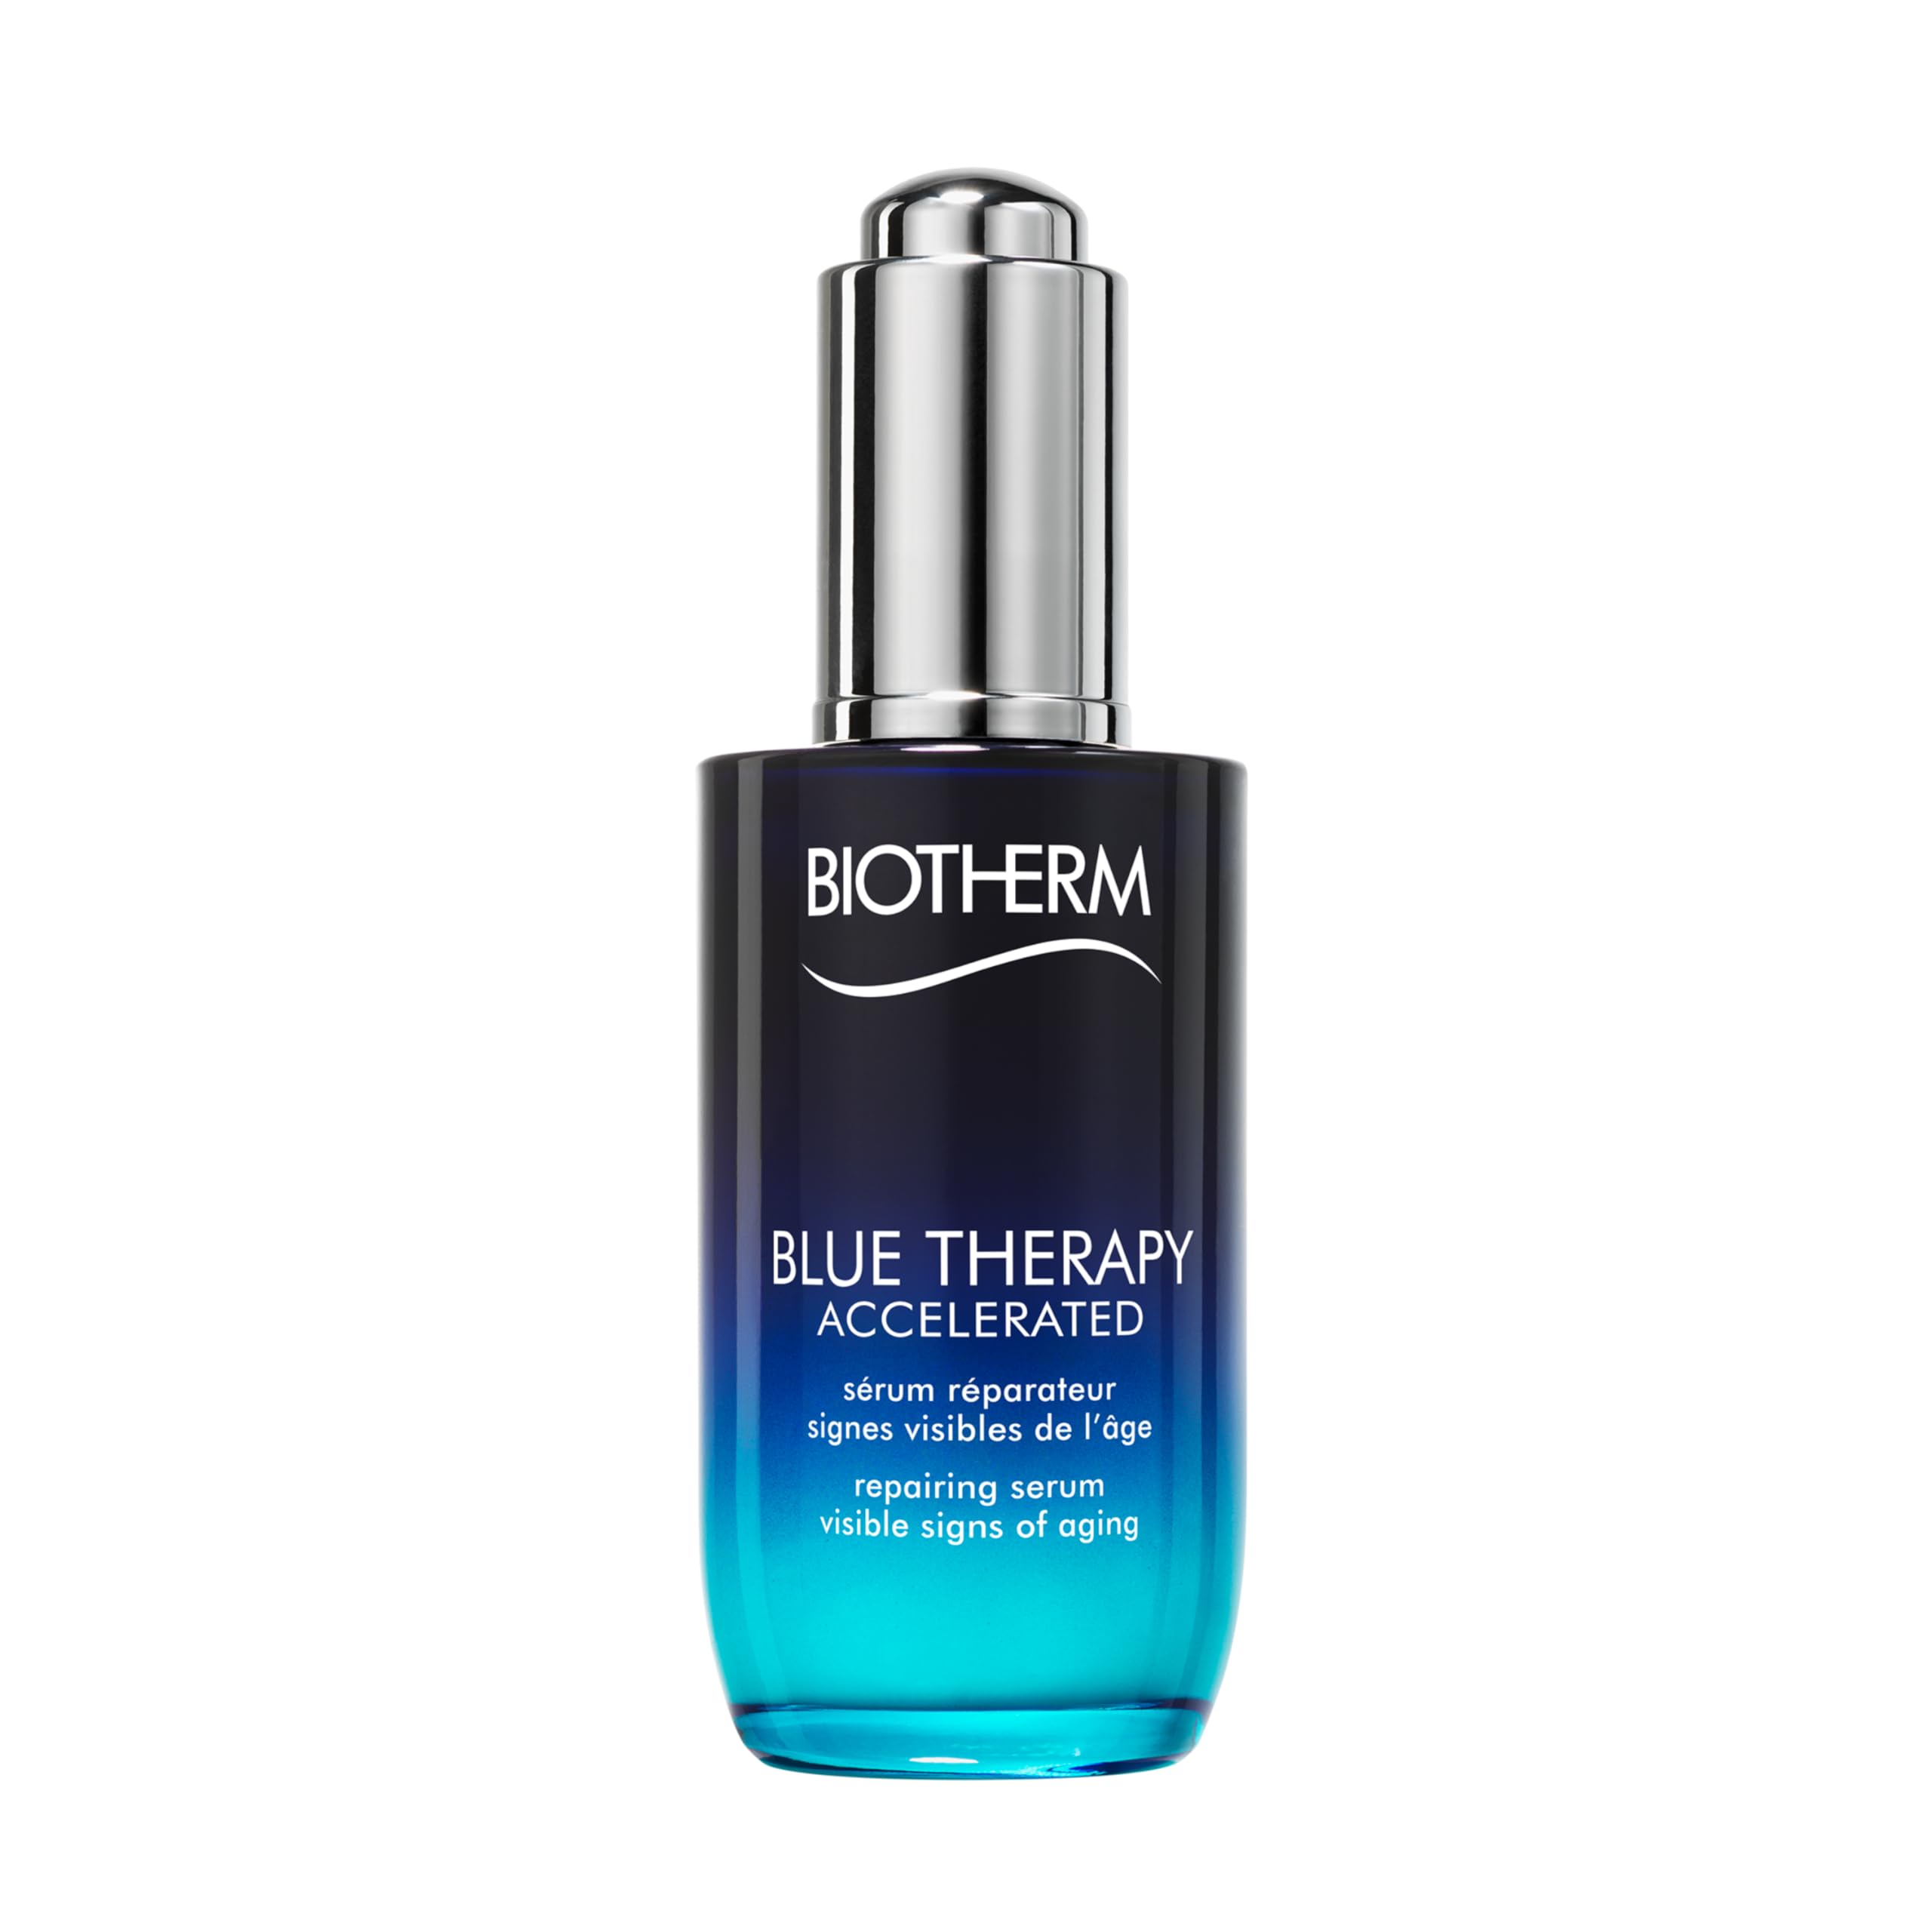 Biotherm Blue Therapy Accelerated, Serum, 1.69 Ounce